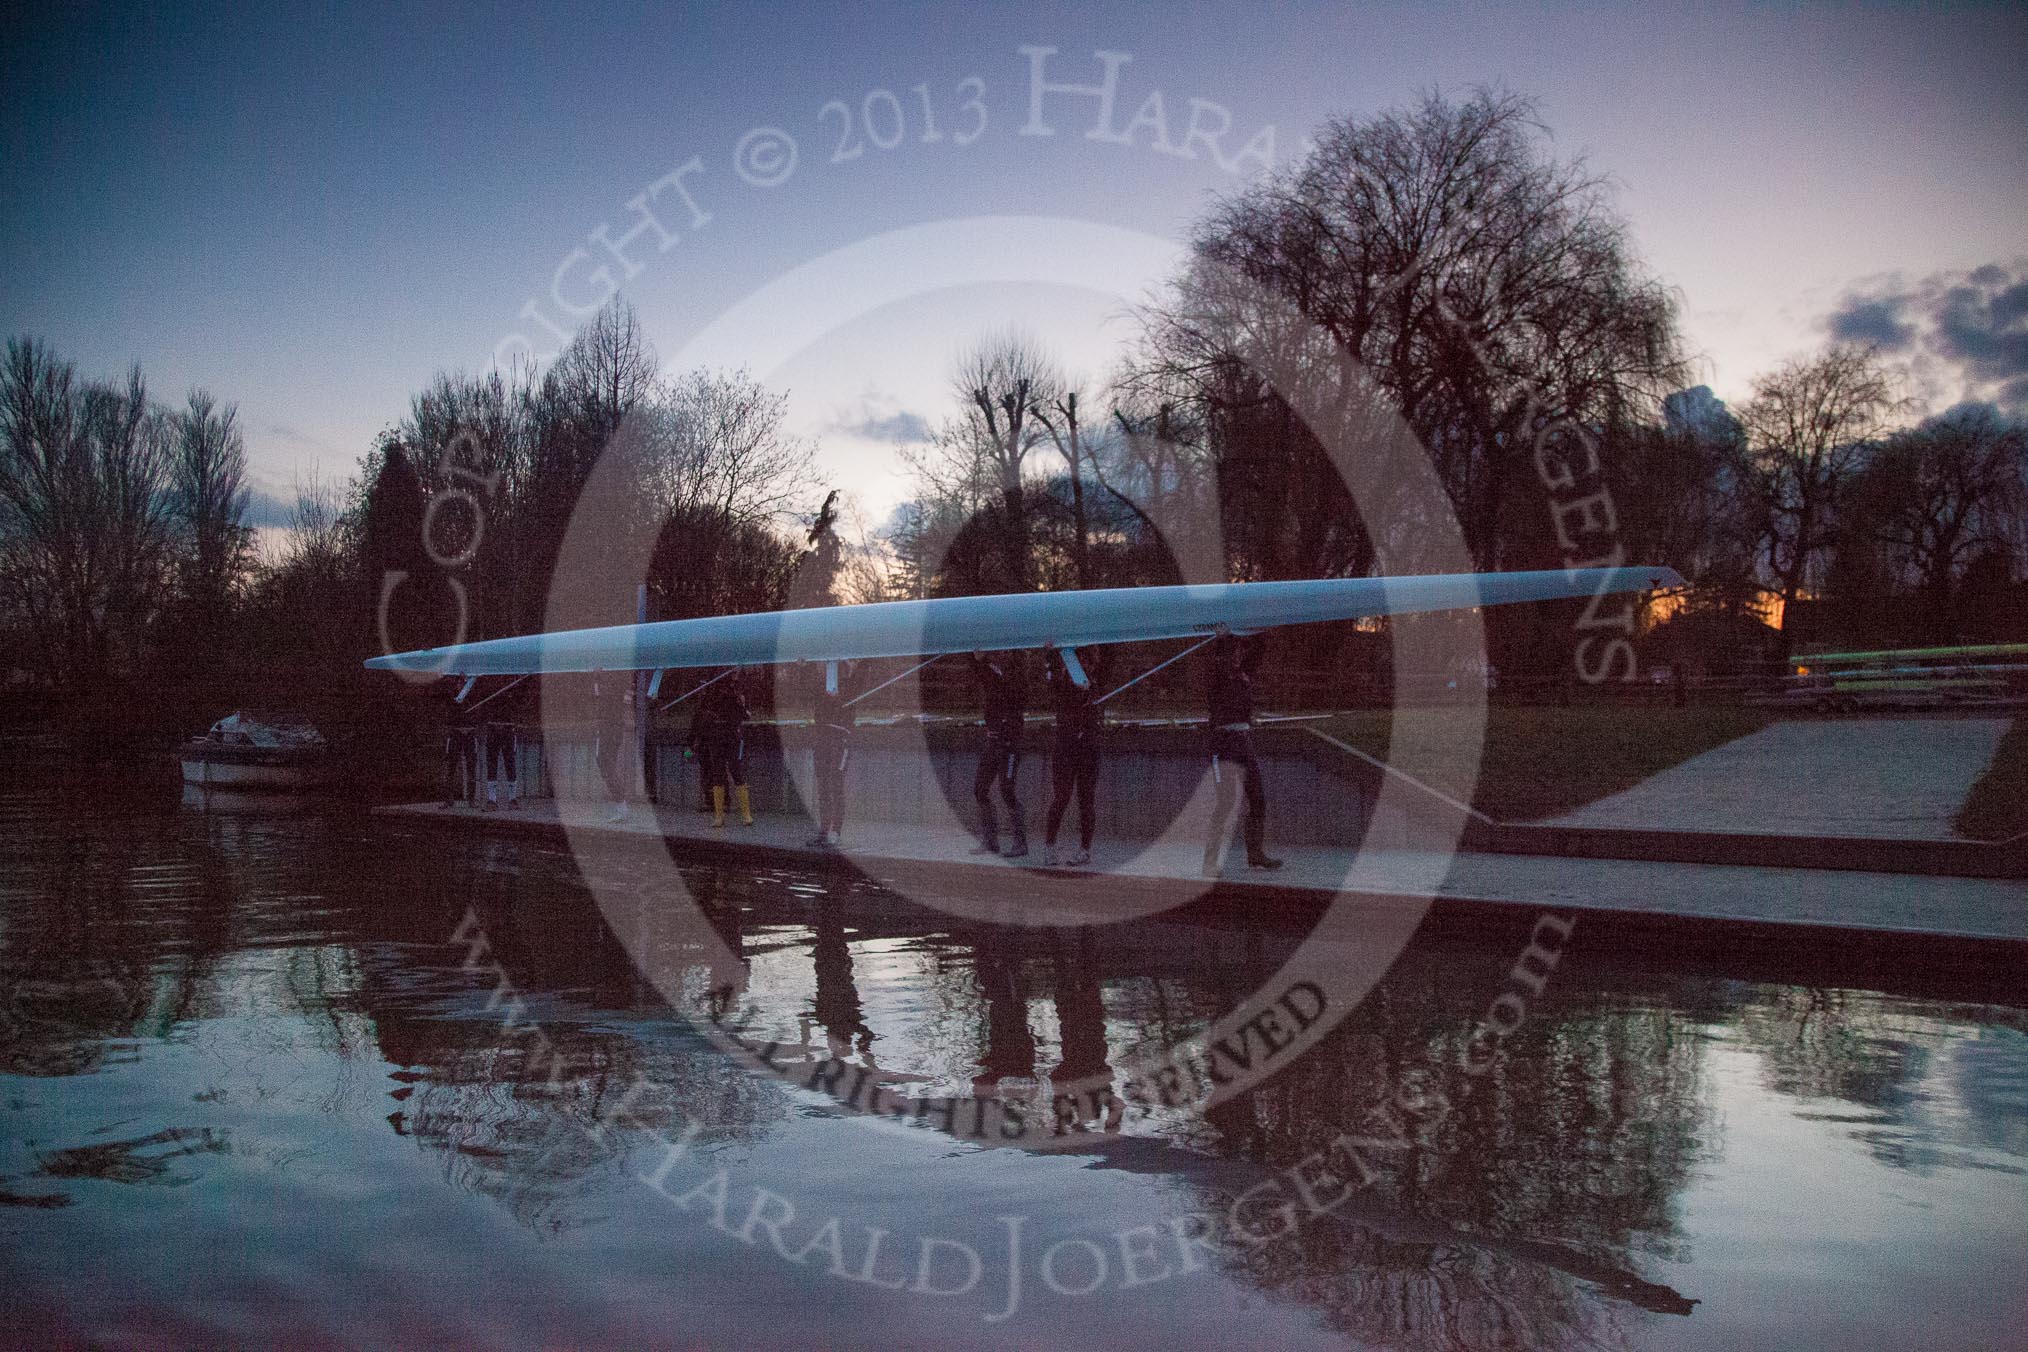 The Boat Race season 2013 - OUWBC training: The OUWBC Blue Boat crew back at Fleming Boathouse, in last light, afther the training session..
River Thames,
Wallingford,
Oxfordshire,
United Kingdom,
on 13 March 2013 at 18:22, image #236